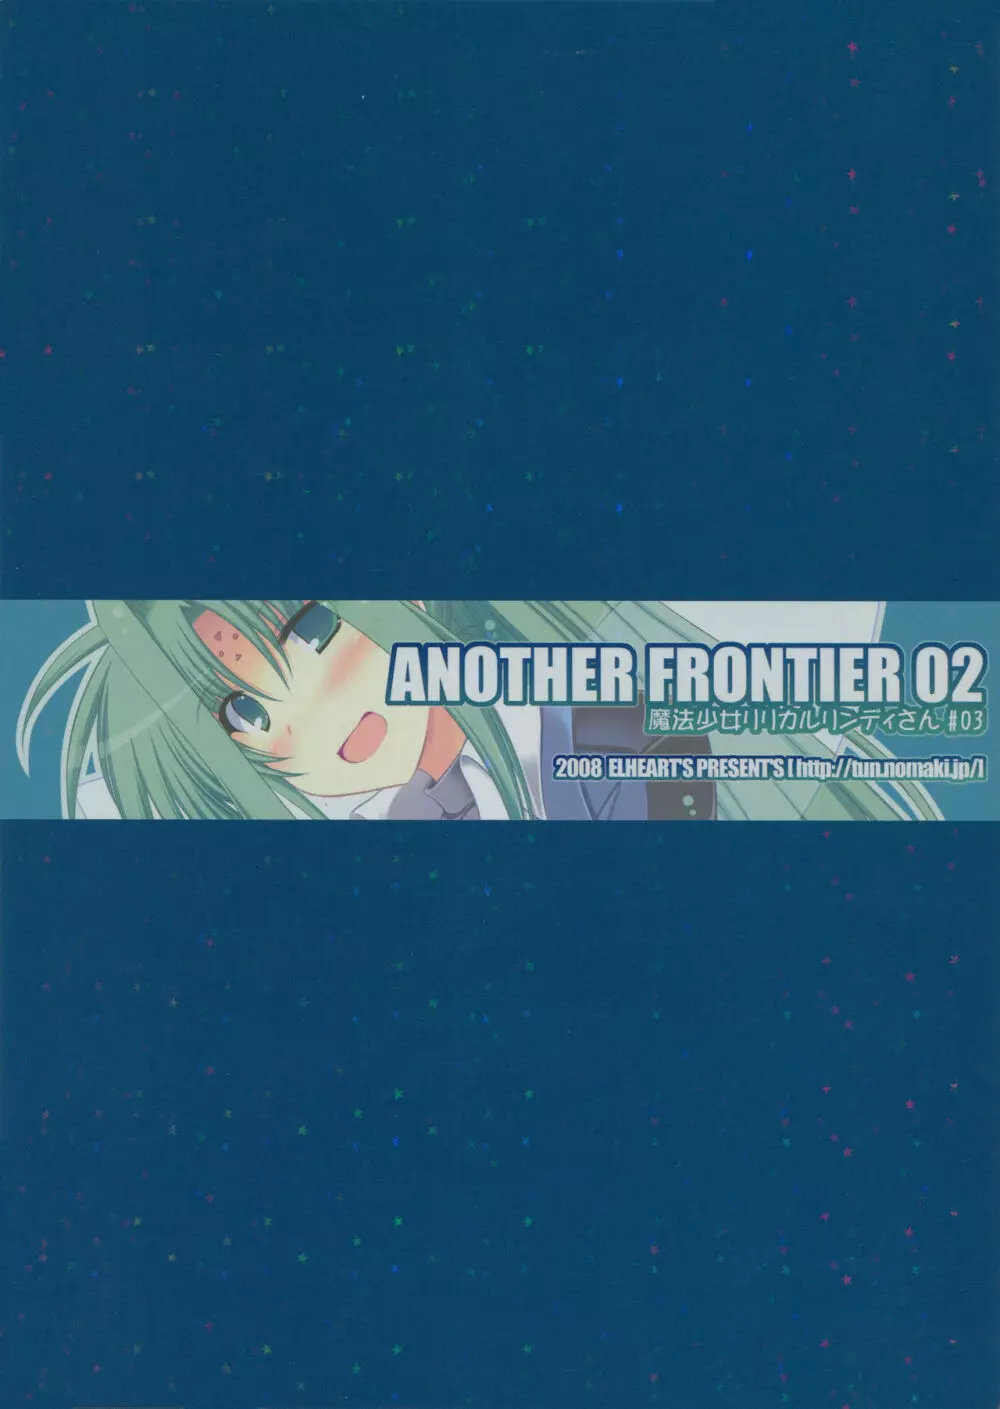 ANOTHER FRONTIER 02 魔法少女リリカルリンディさん #03 42ページ